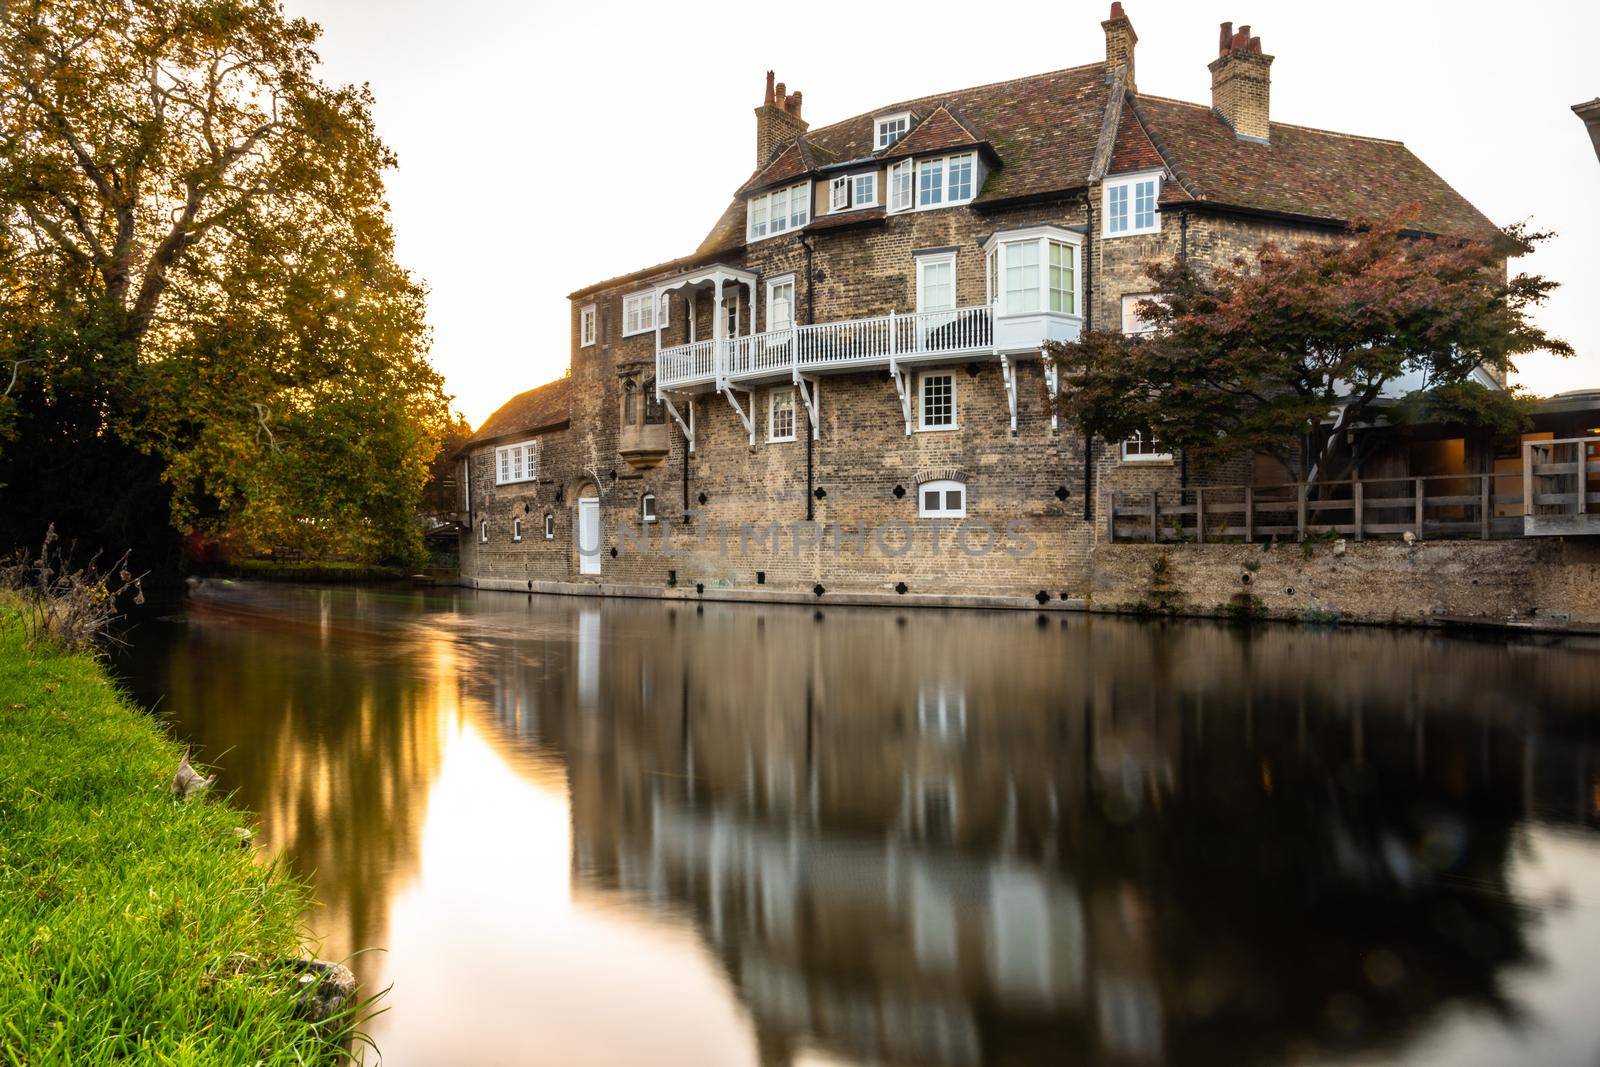 Long exposure of typical Cambridge building by the river by mauricallari